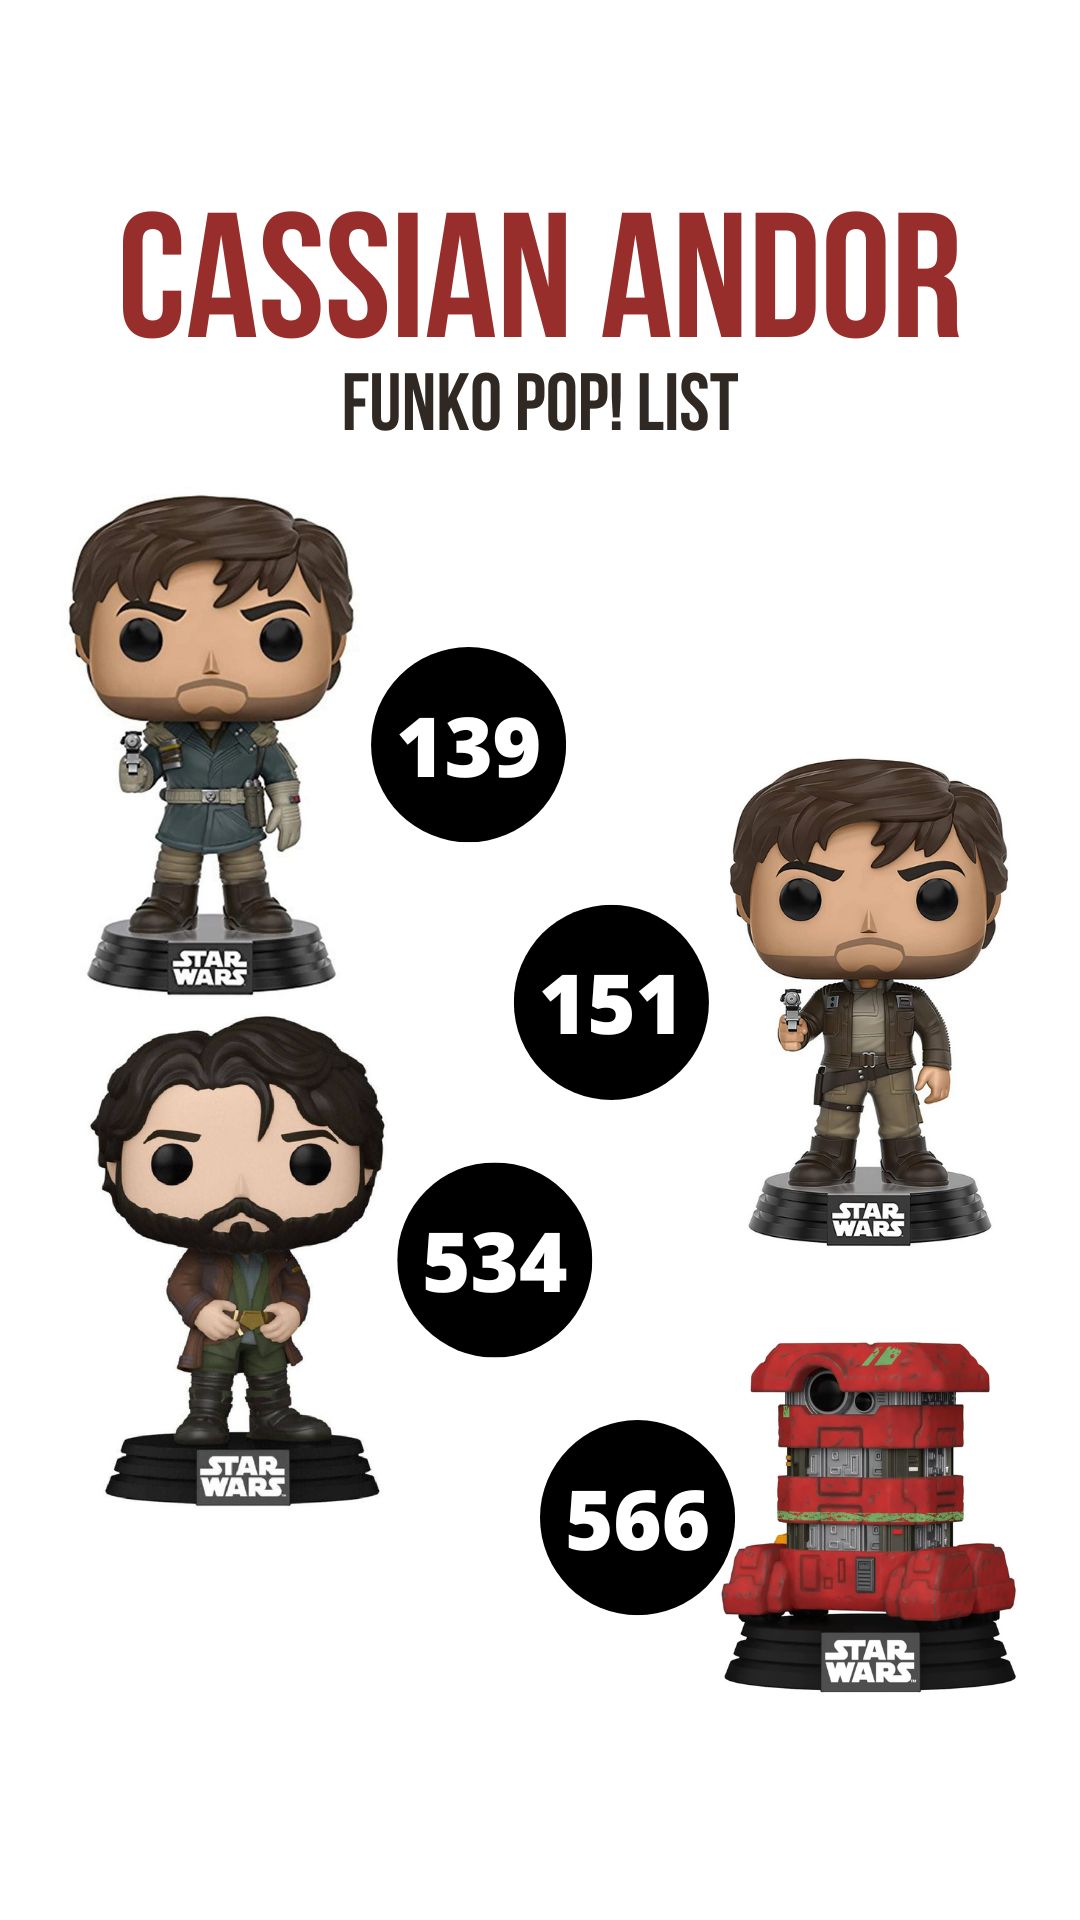 Cassian Andor Funko Pop Checklist – Figures without boxes